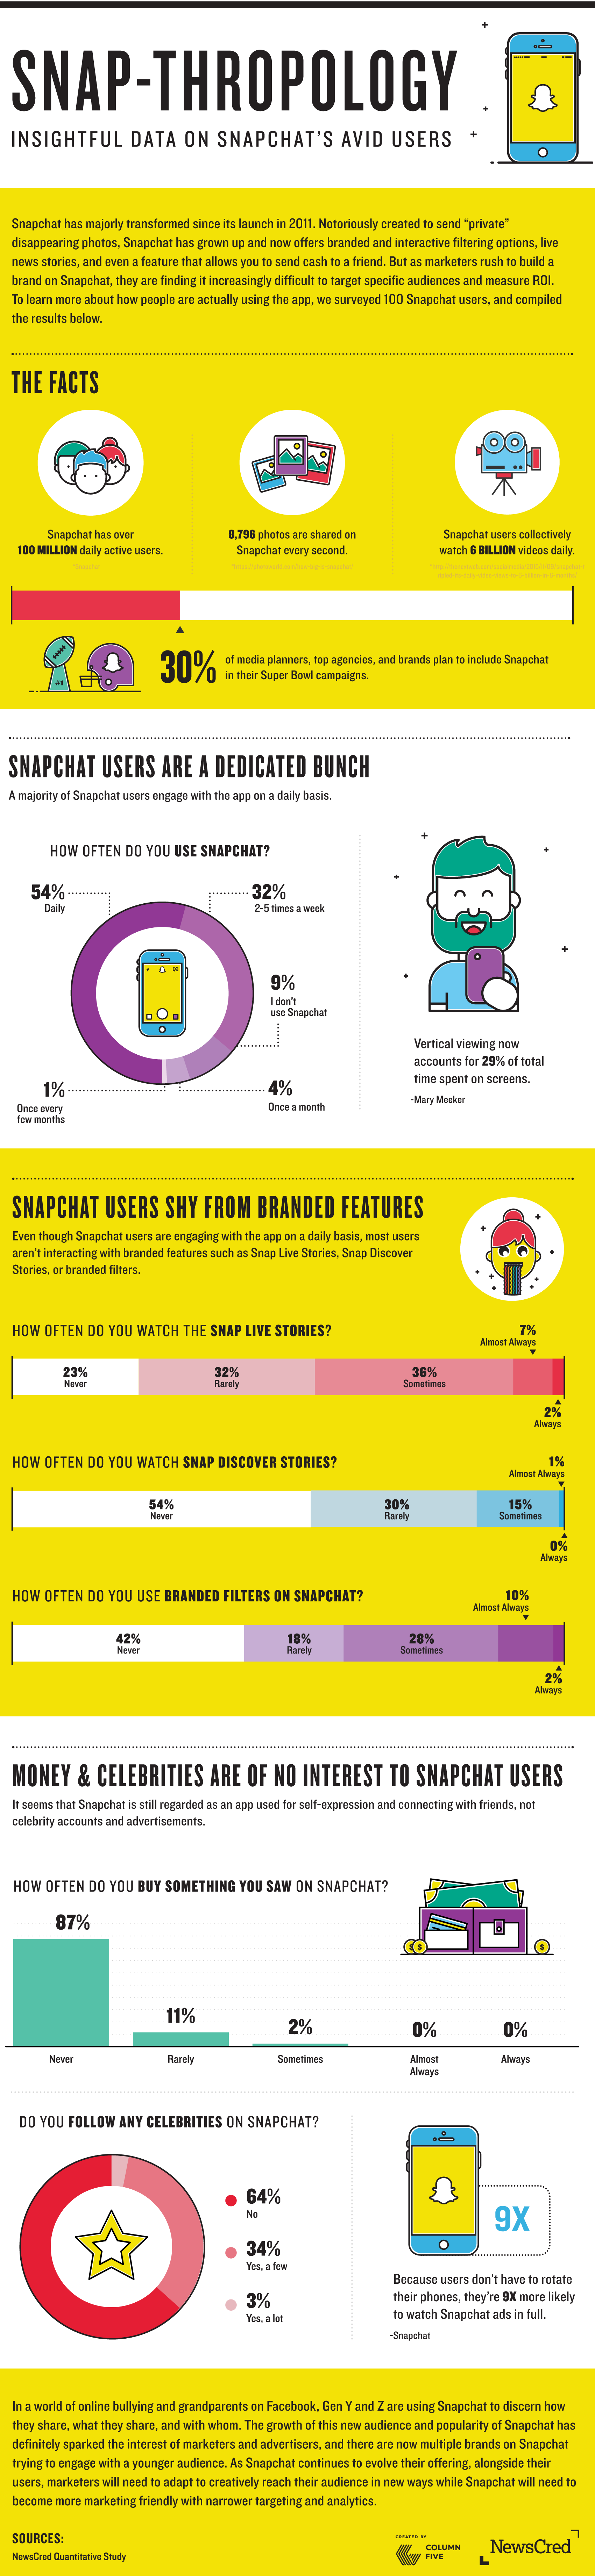 » Interesting Stats & Facts about Snapchat's Dedicated Users (Infographic)